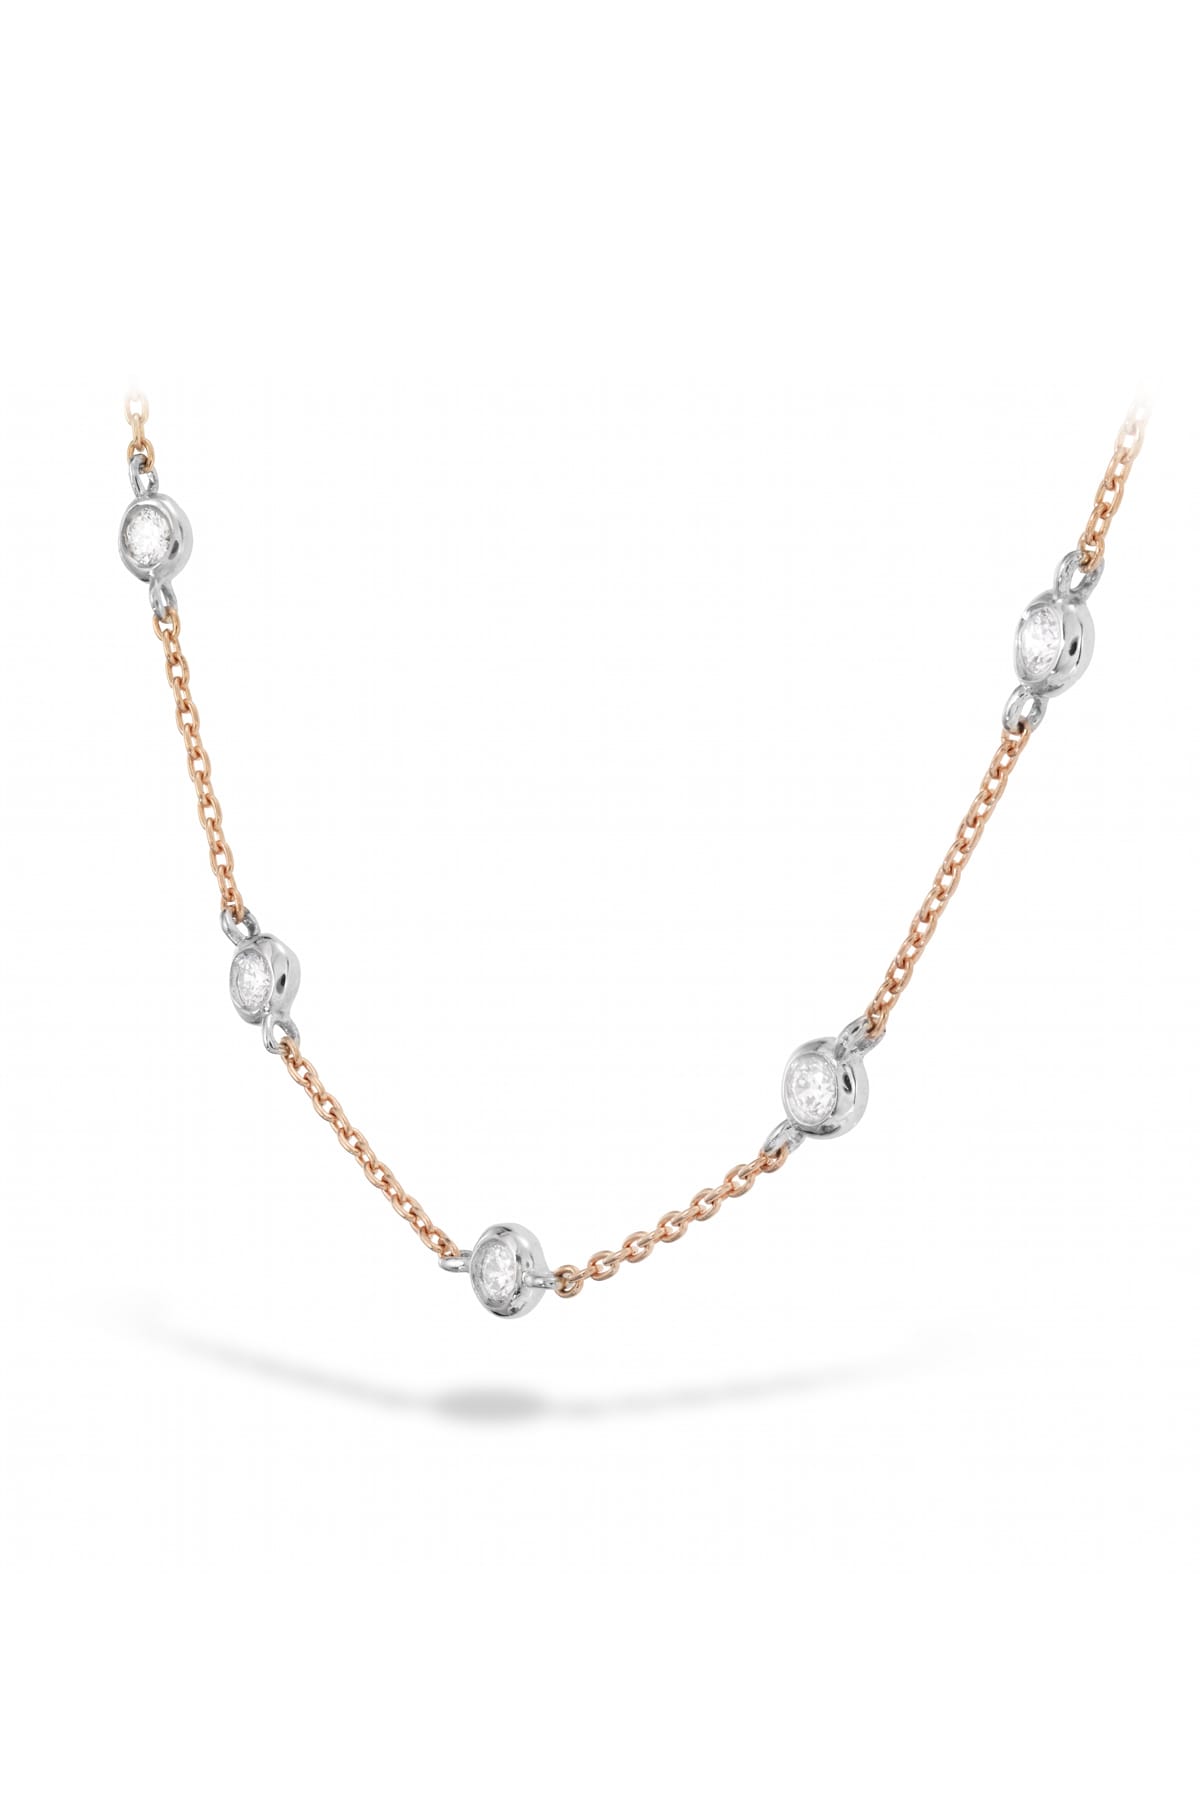 Signature Off-Set Five Bezel Necklace From Hearts On Fire available at LeGassick Diamonds and Jewellery Gold Coast, Australia.